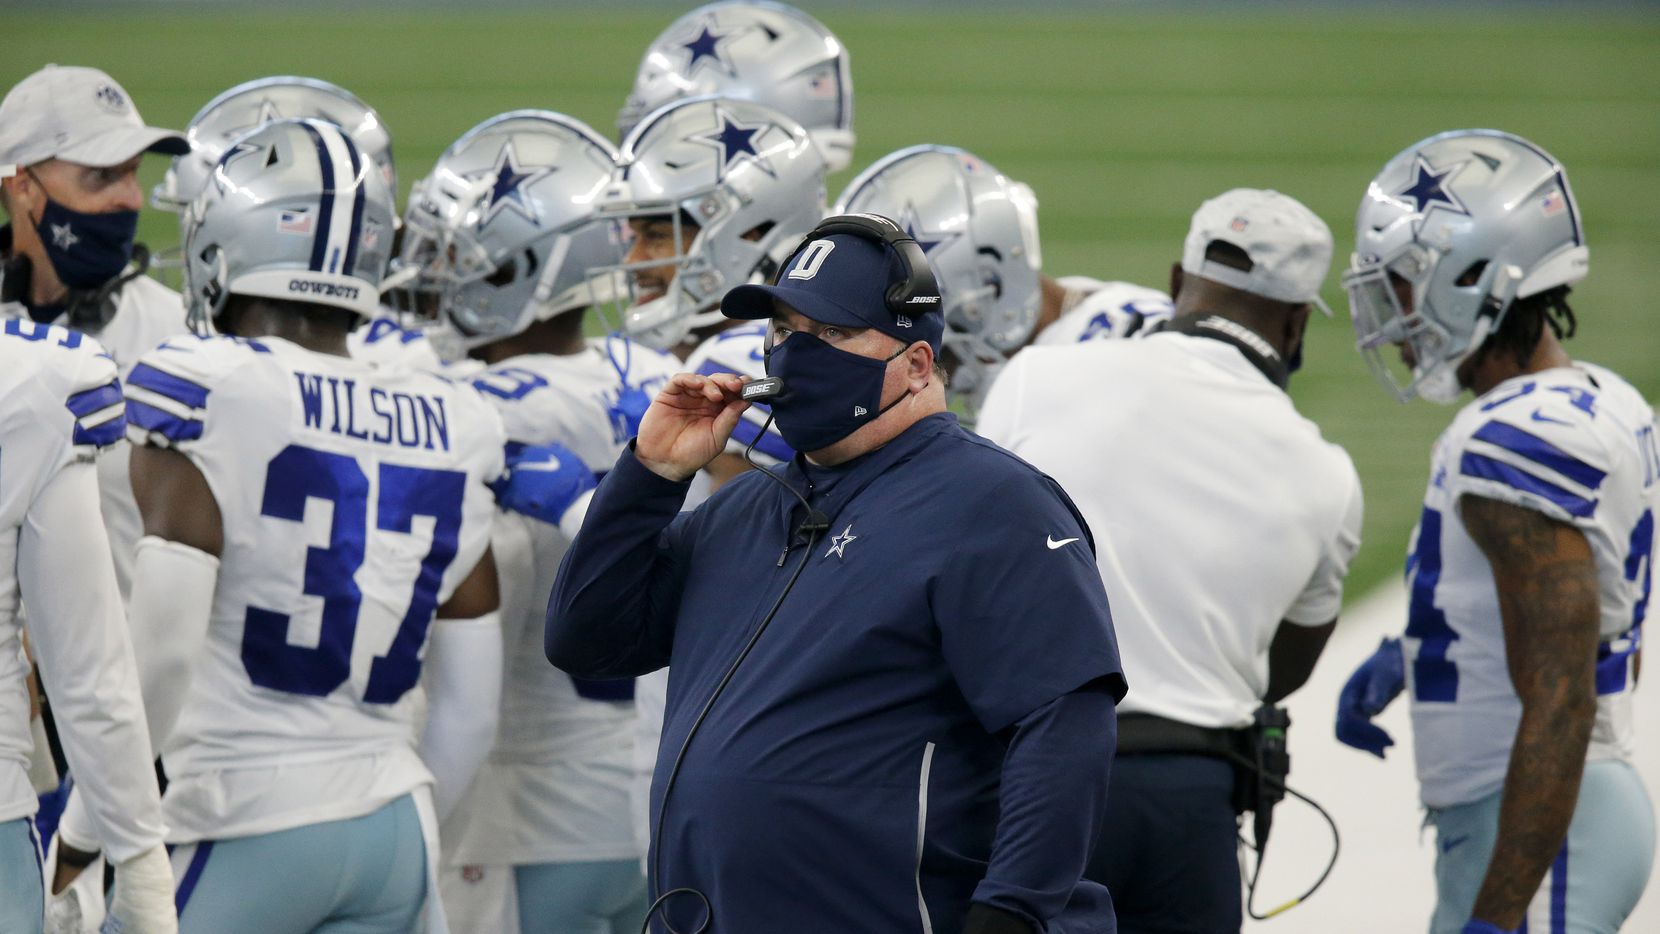 Dallas Cowboys head coach Mike McCarthy is pictured on the sideline after his team scored a...